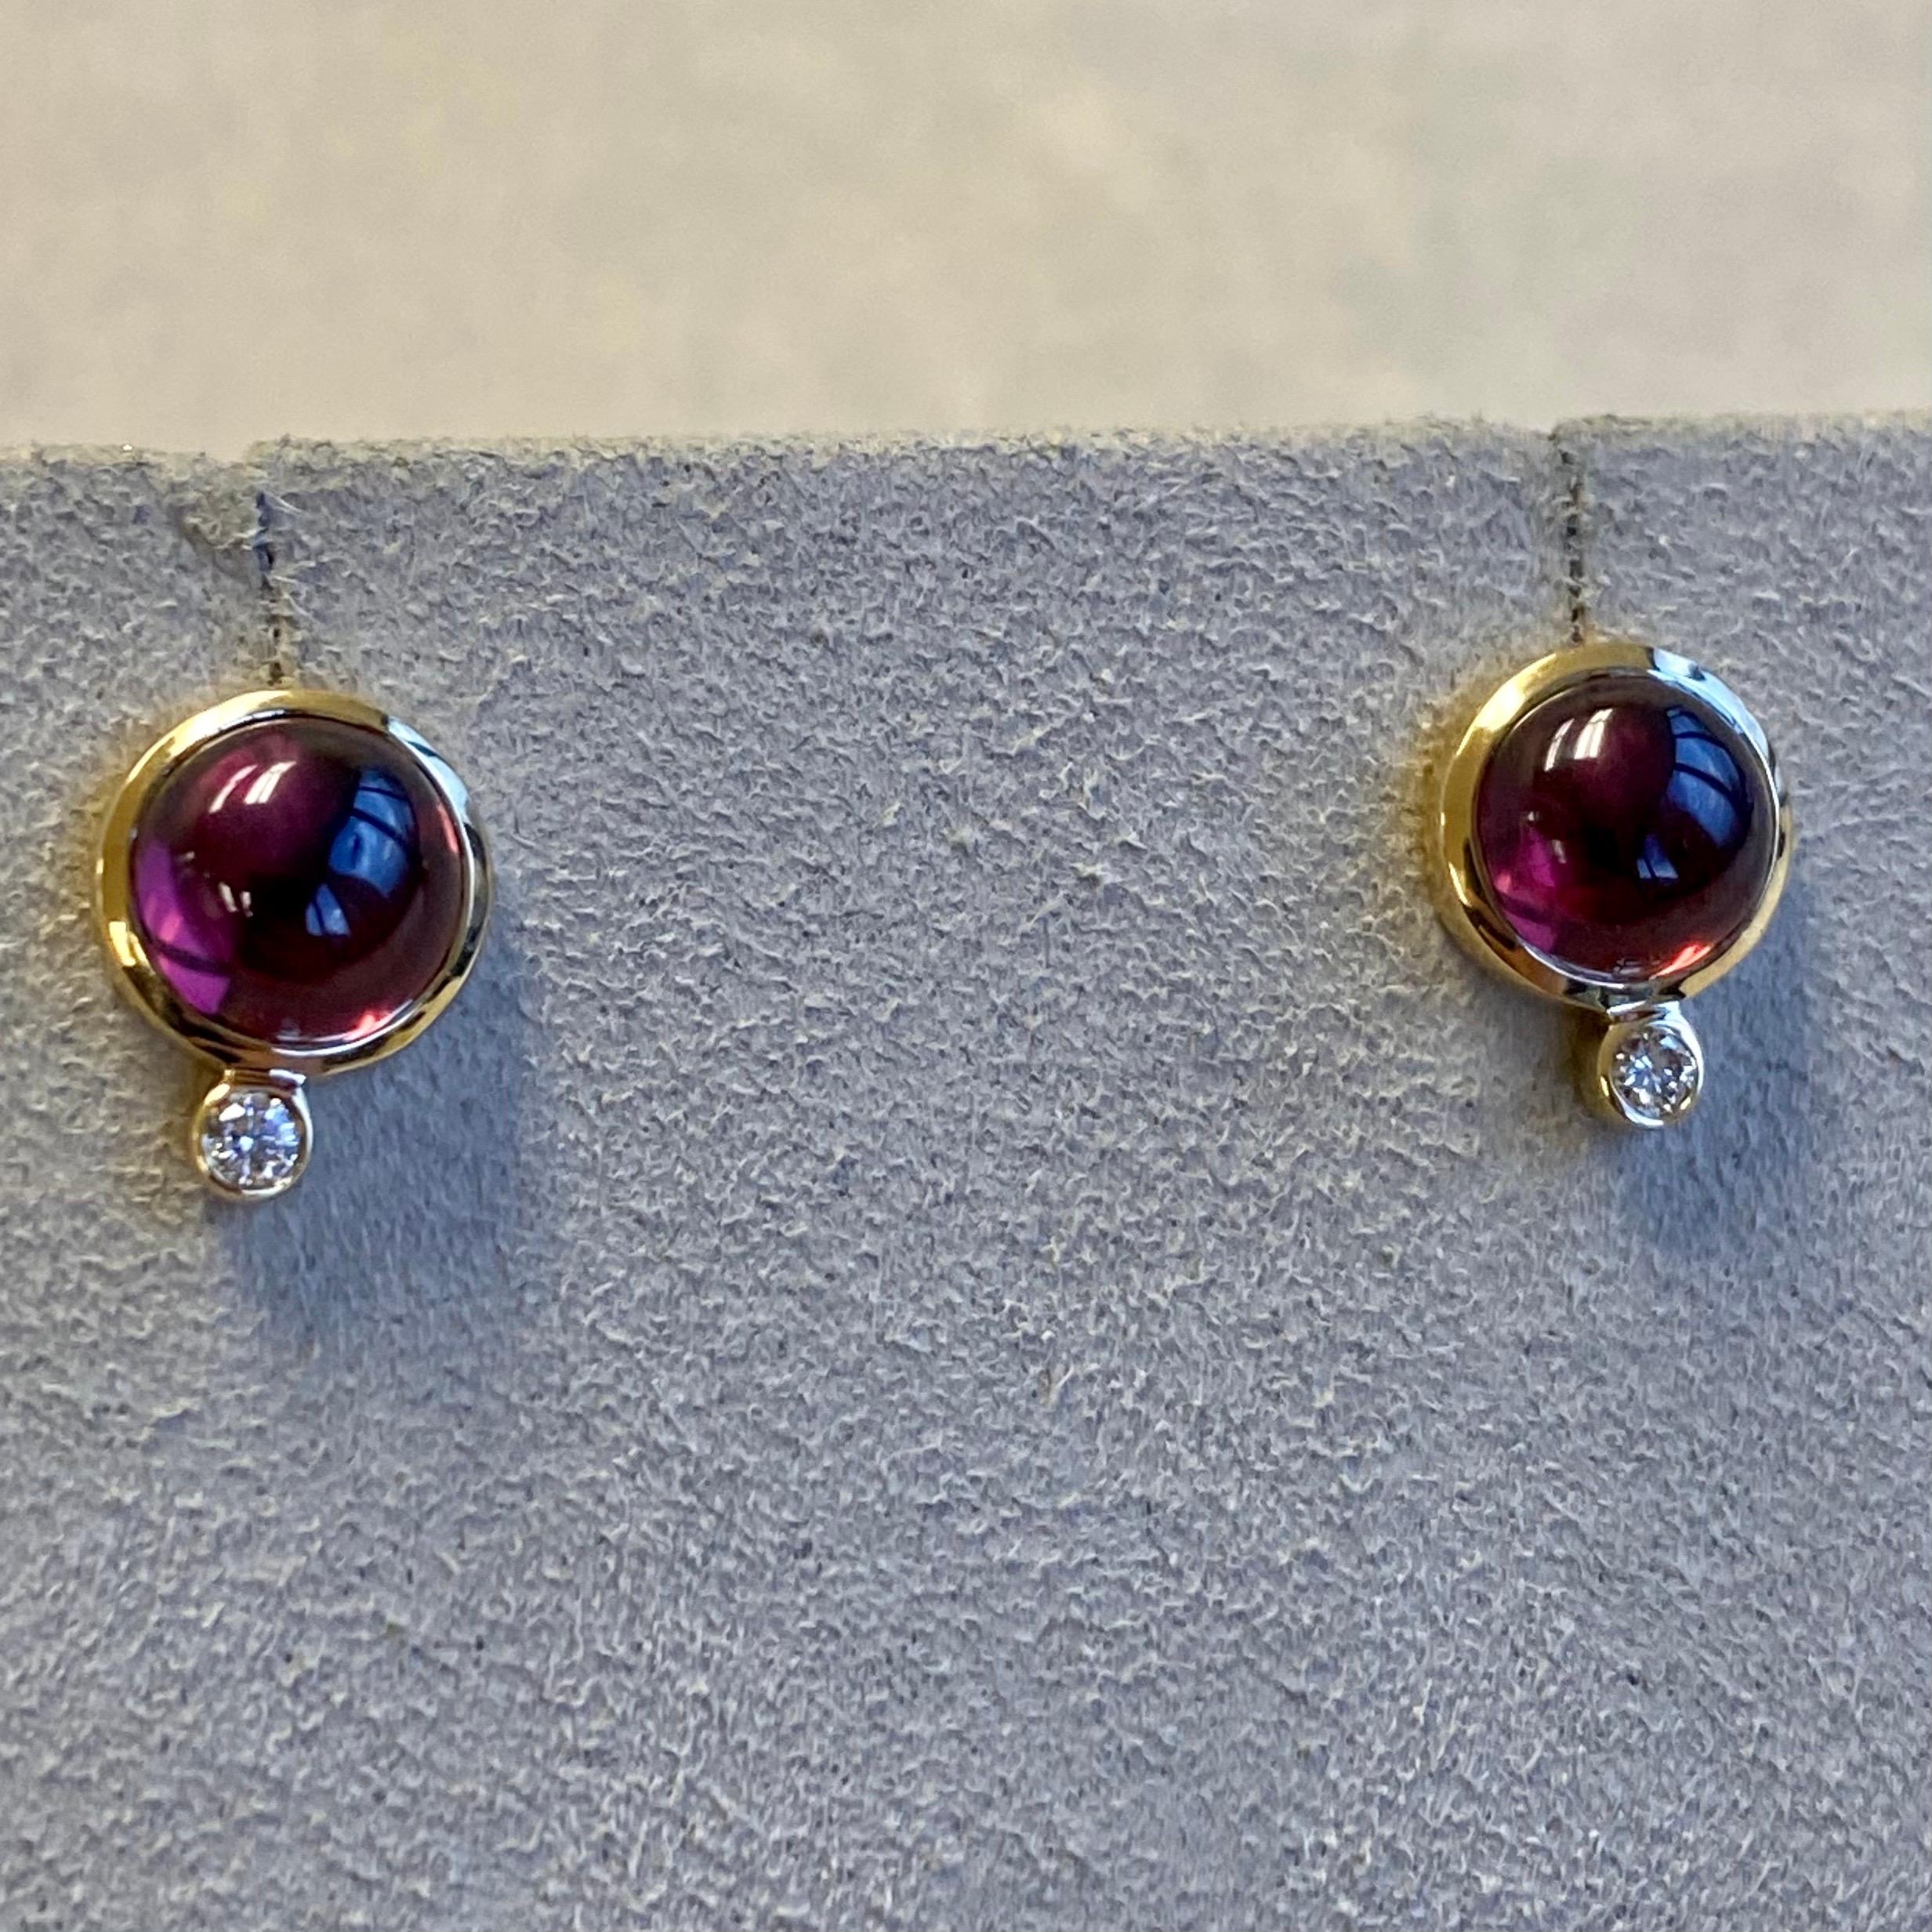 Created in 18 karat yellow gold
Rhodolite Garnet 4 carats approx.
Diamonds 0.10 carat approx.
Can be worn at different angles
Limited edition

Exquisitely crafted in 18 karat yellow gold, these limited edition earrings boast a rhodolite garnet